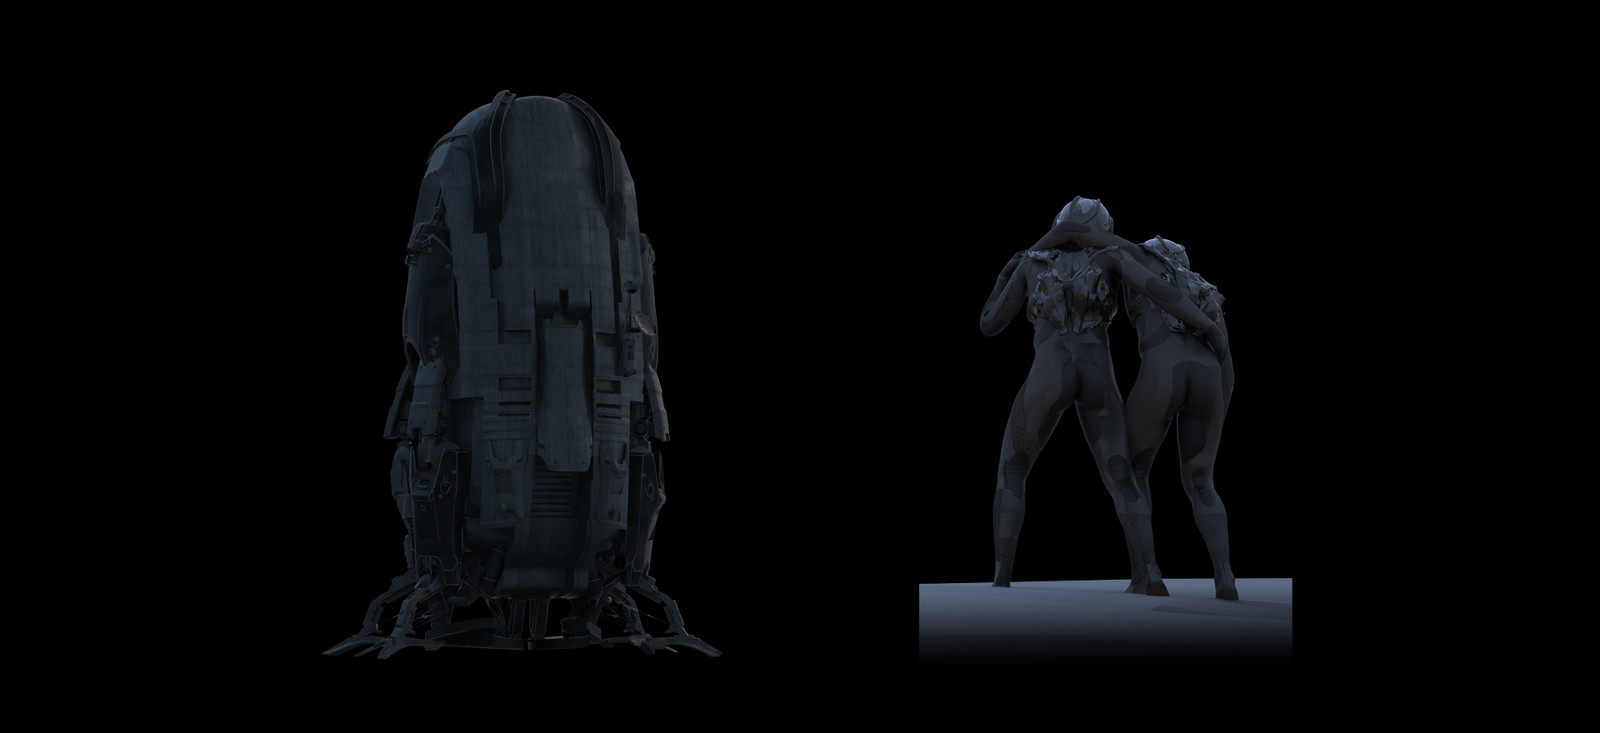 3d blockouts for the main focus points and some basic posed suit design